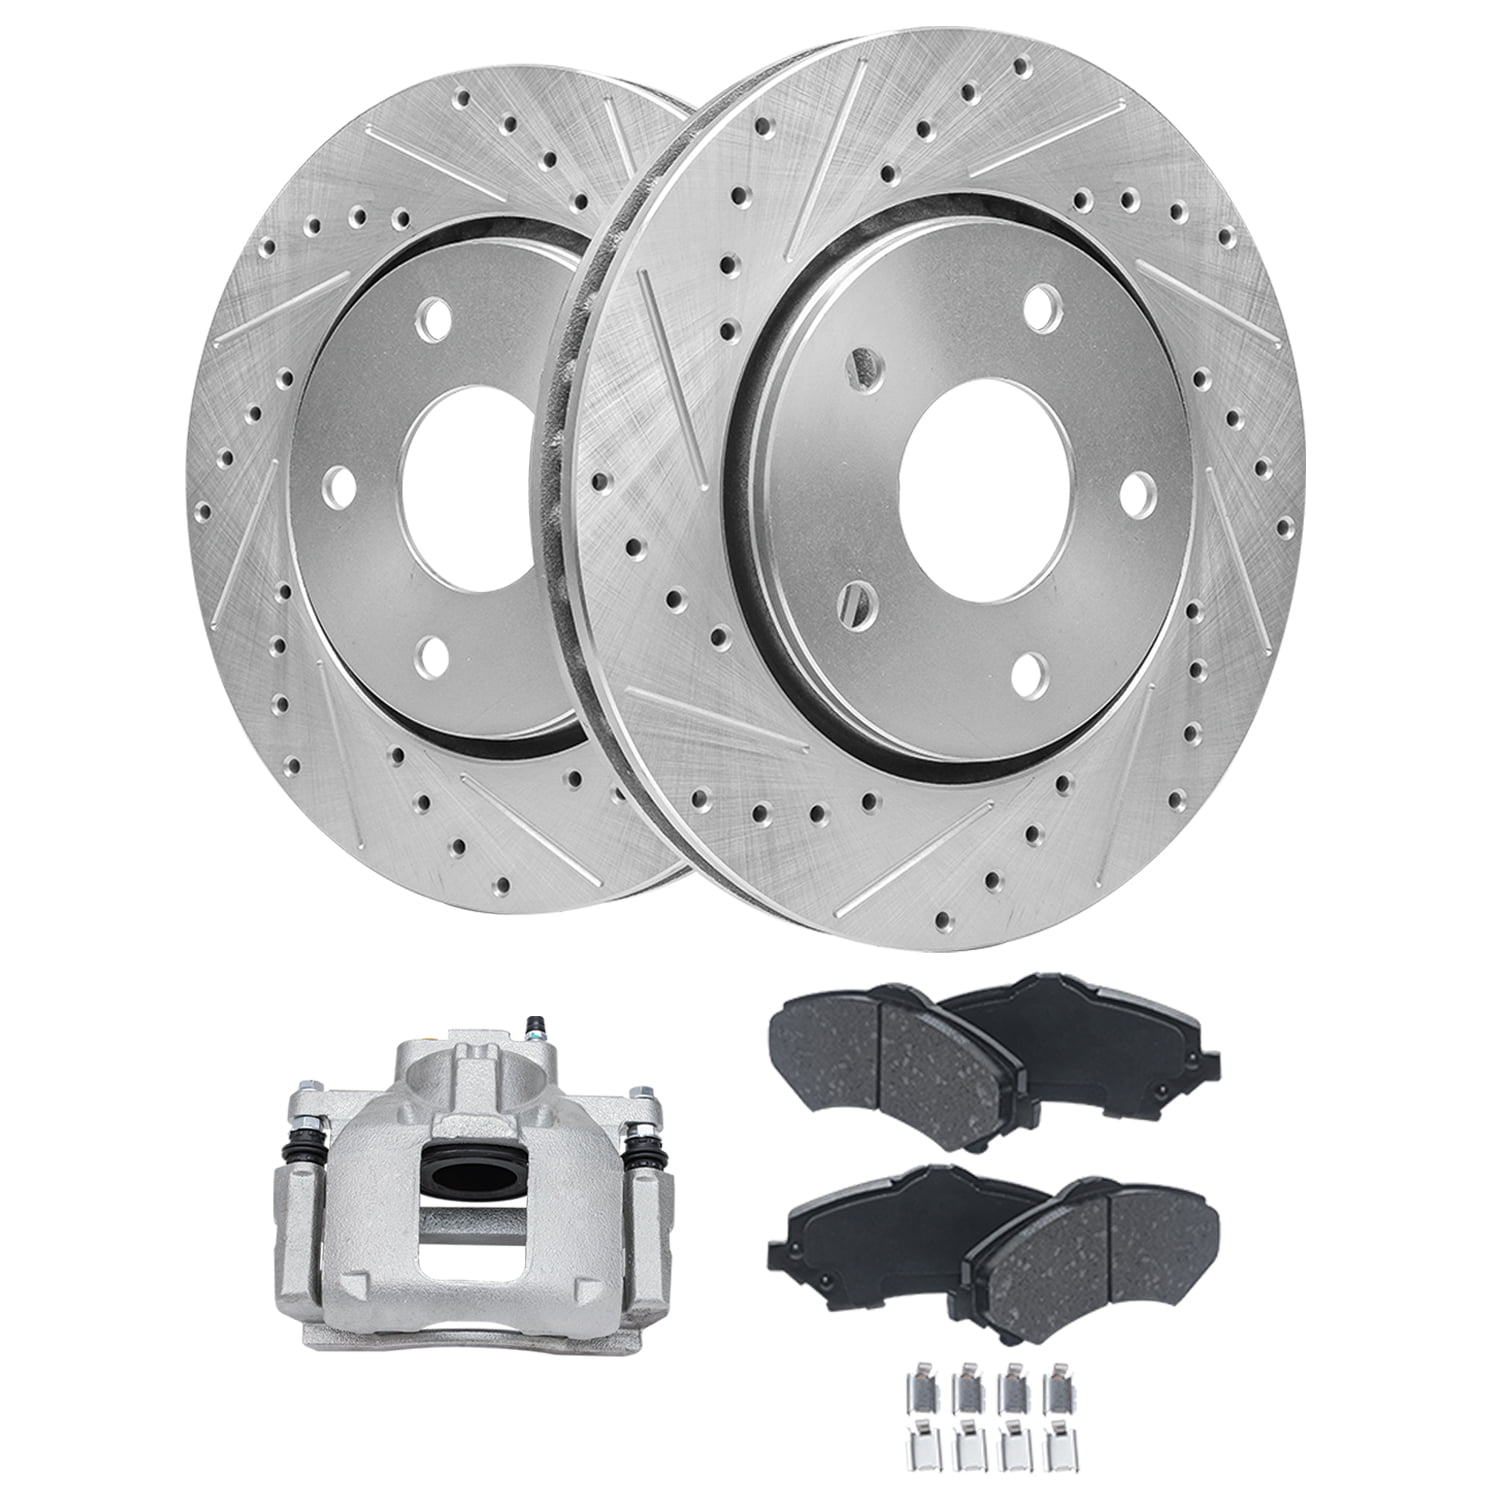 Detroit Axle Front Drilled Rotors Brake Pads Right Caliper Replacement  for Chrysler Town  Country Dodge Grand Caravan